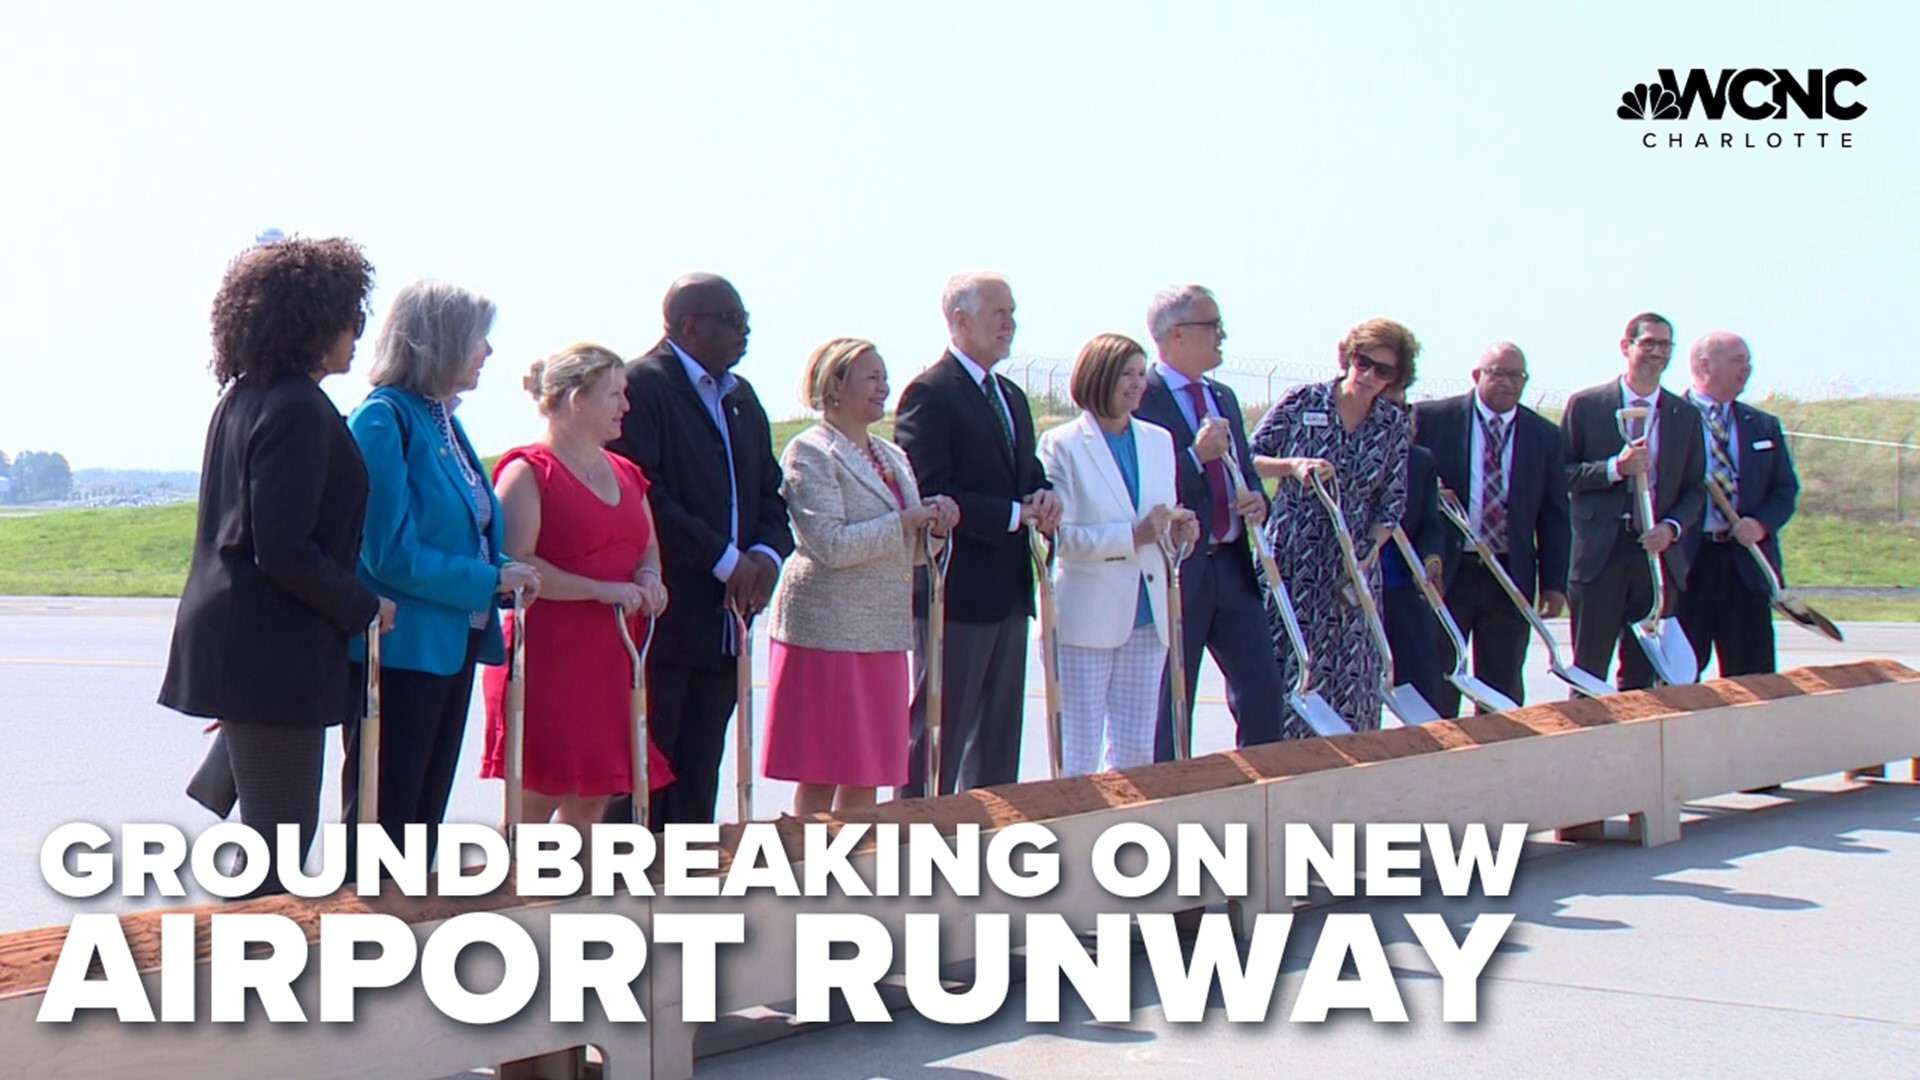 Charlotte Douglas Airport is breaking ground on a new, fourth parallel runway.